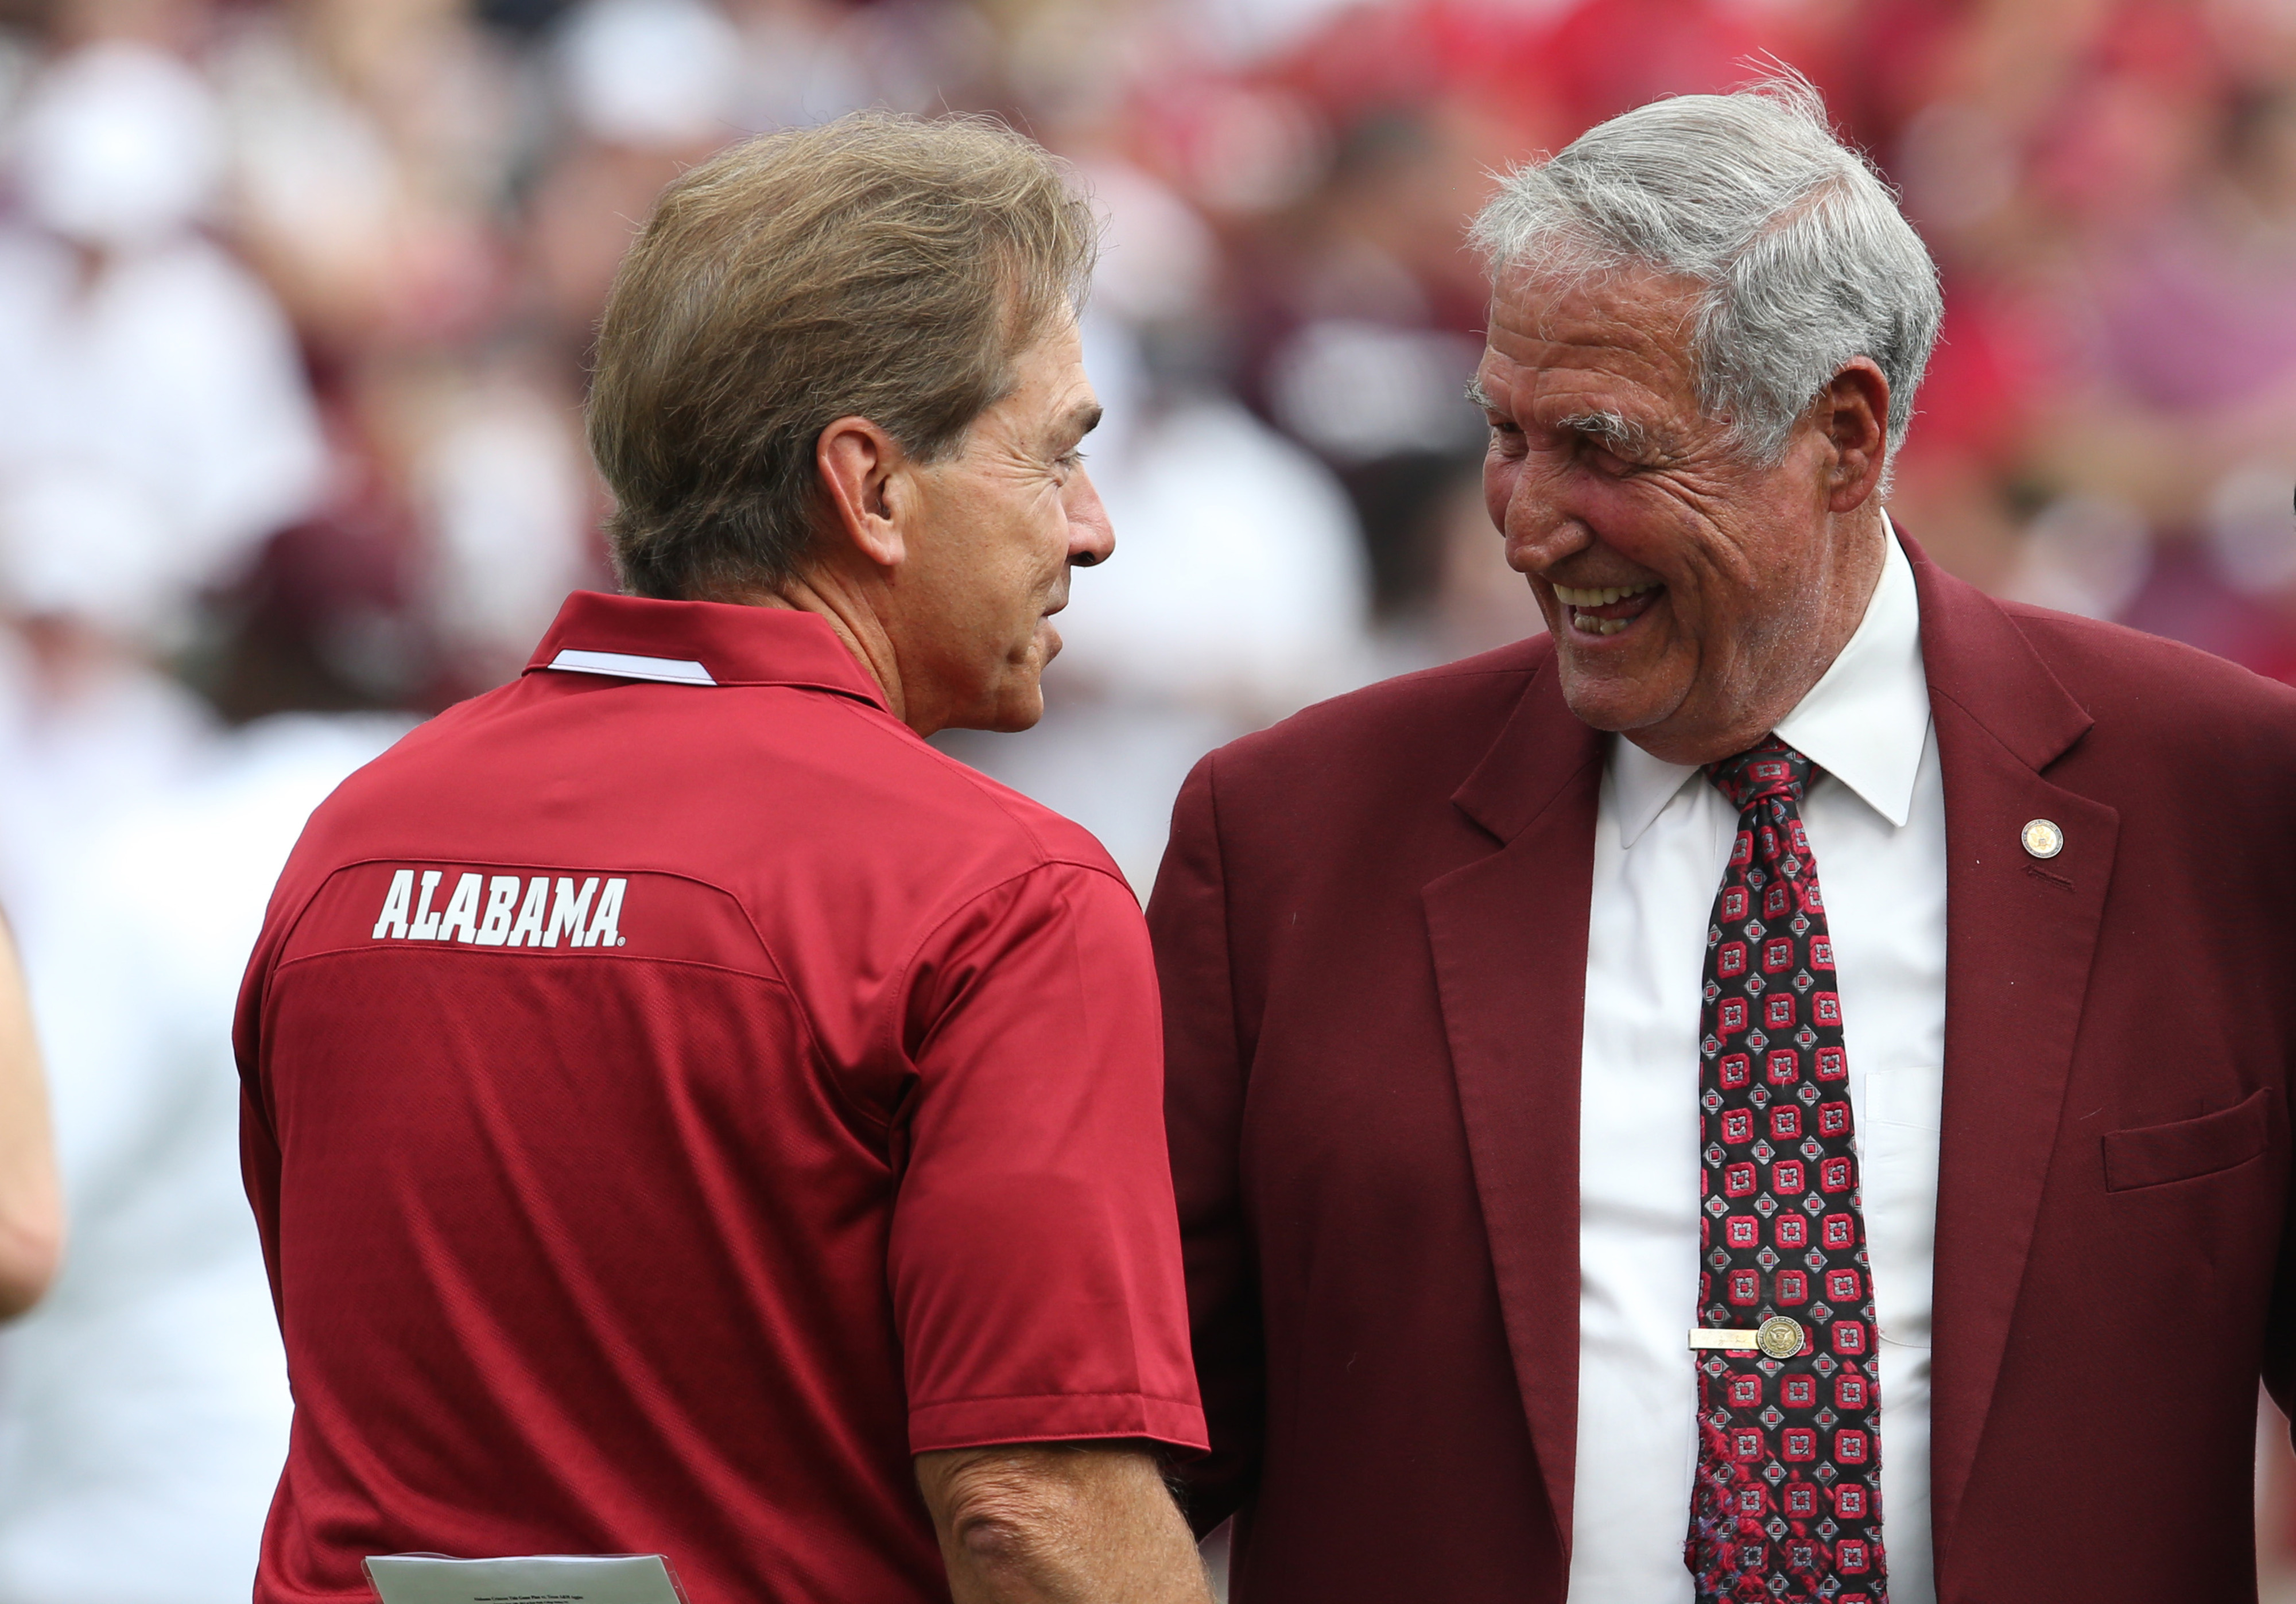 You can't have him, Alabama! Gene Stallings was ours first!